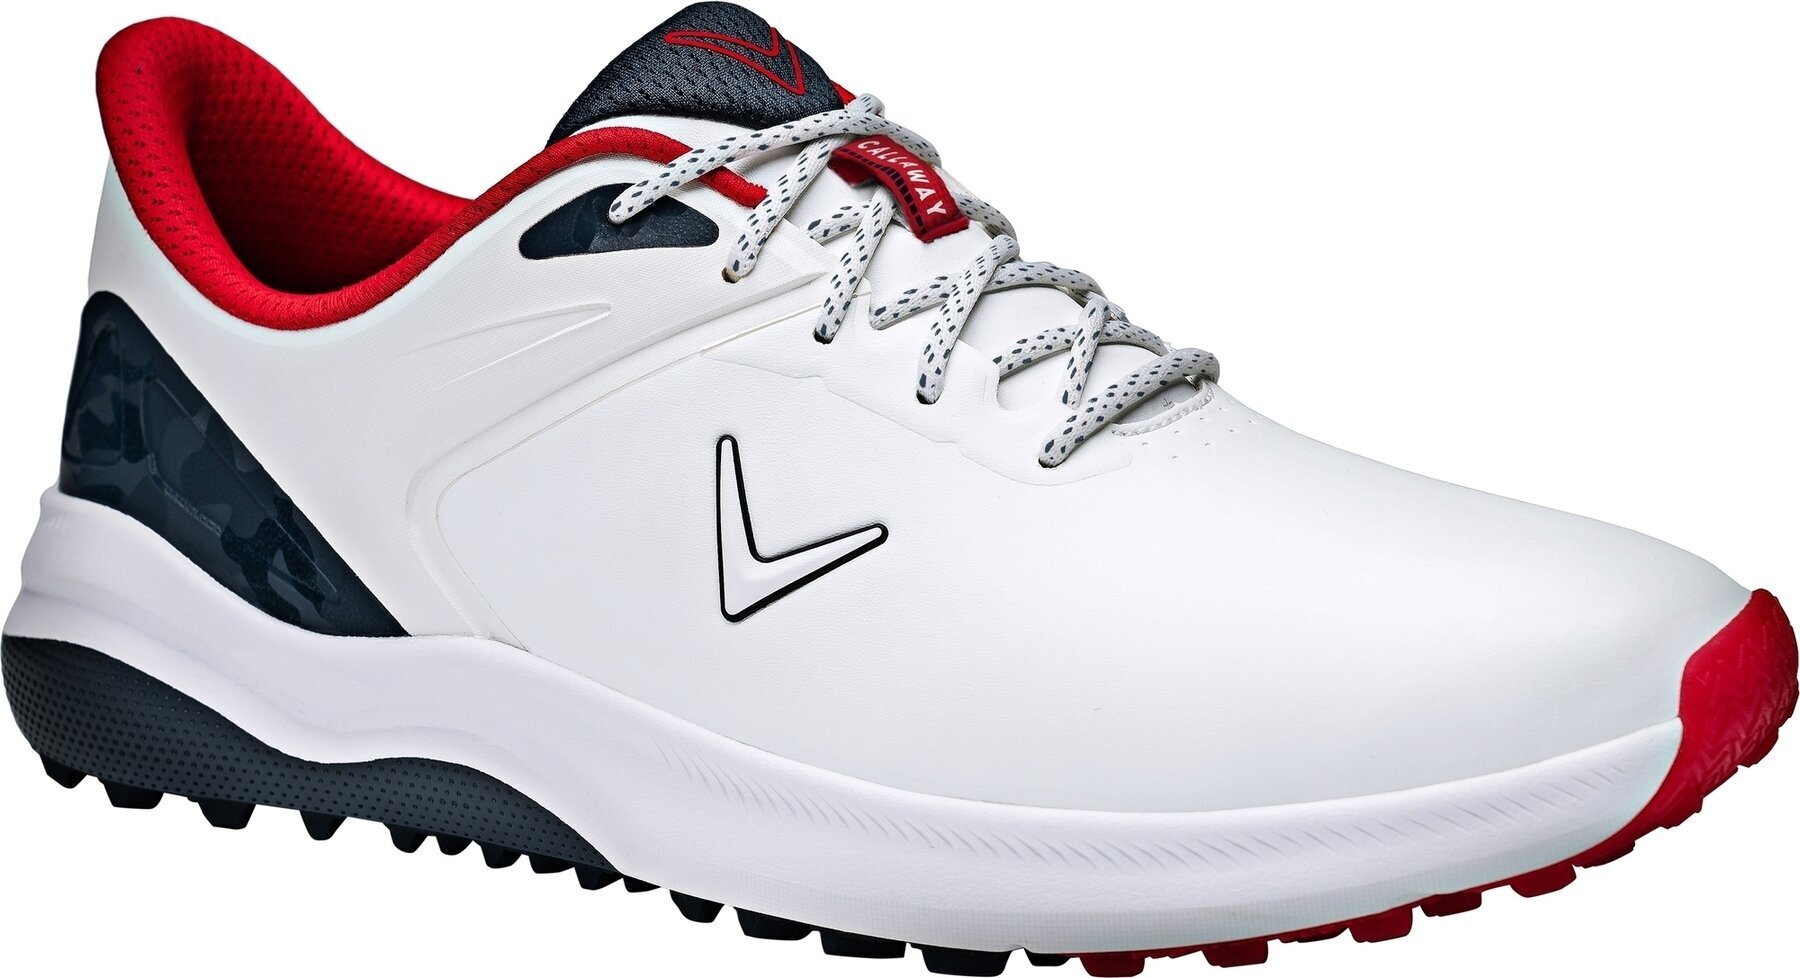 Men's golf shoes Callaway Lazer Mens Golf Shoes White/Navy/Red 40,5